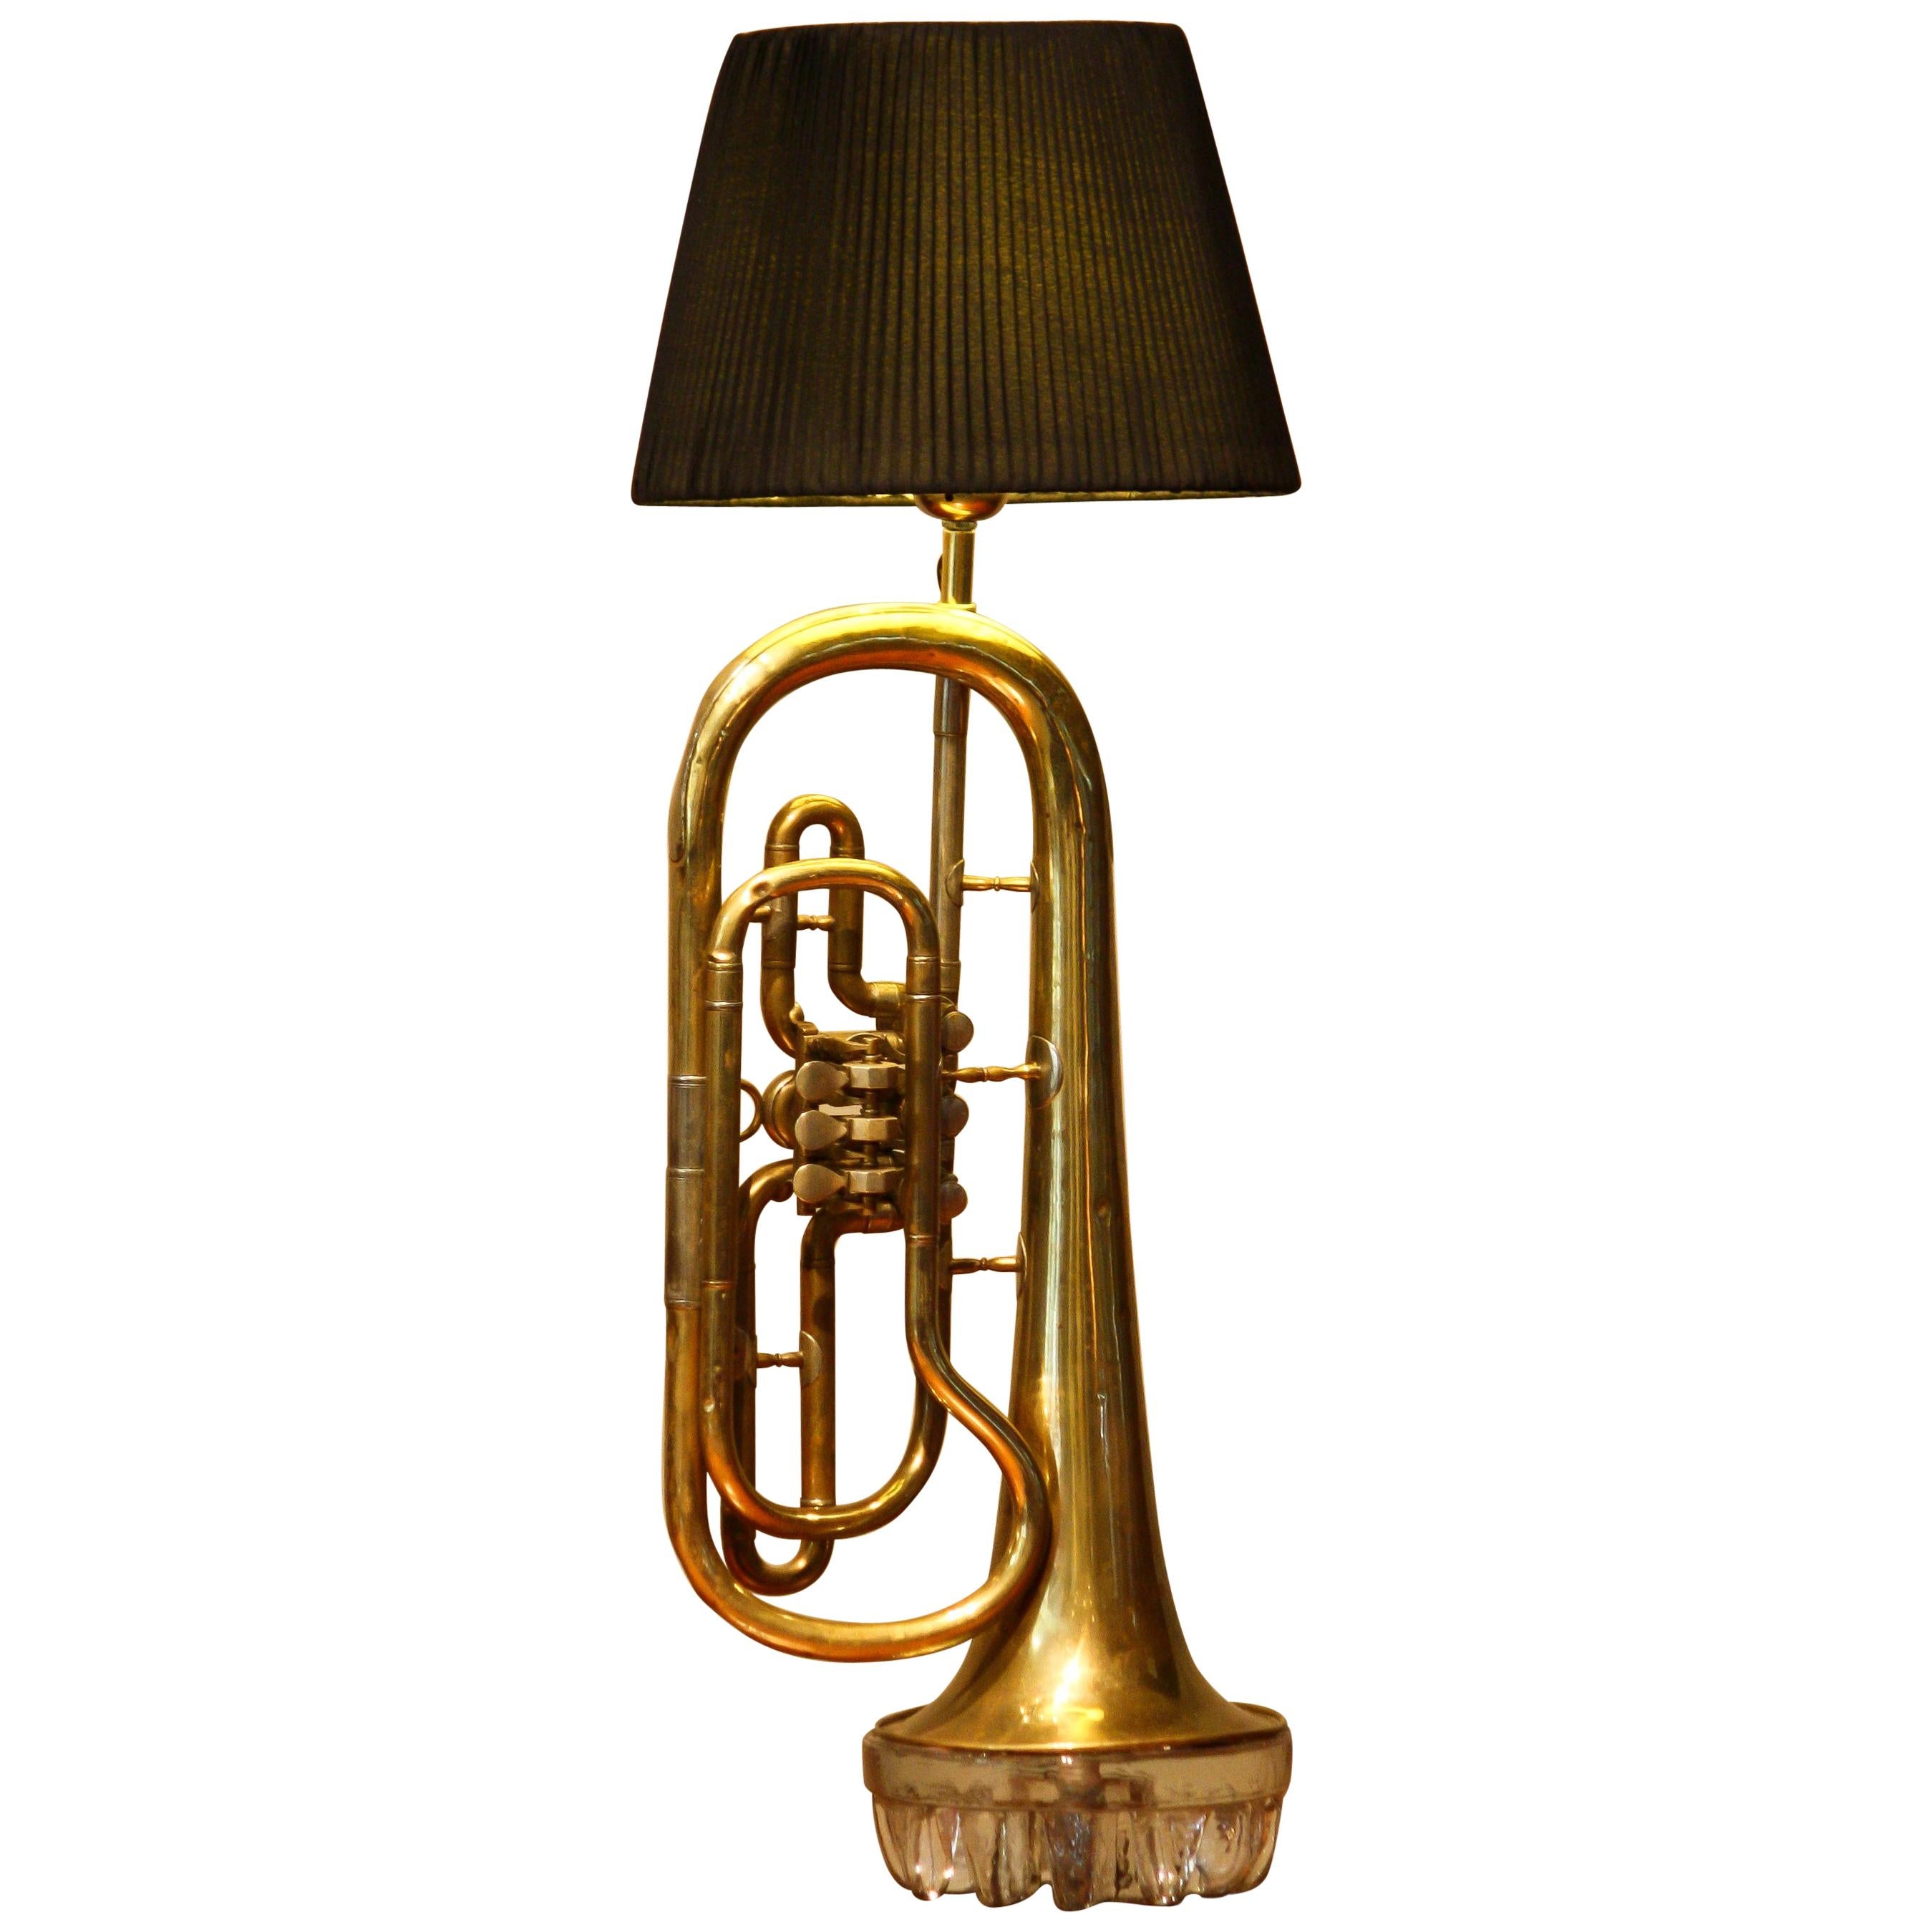 Central American Table Lamp Made of an American Cornet Flaps Trumpet from 1920s in Art Deco Style